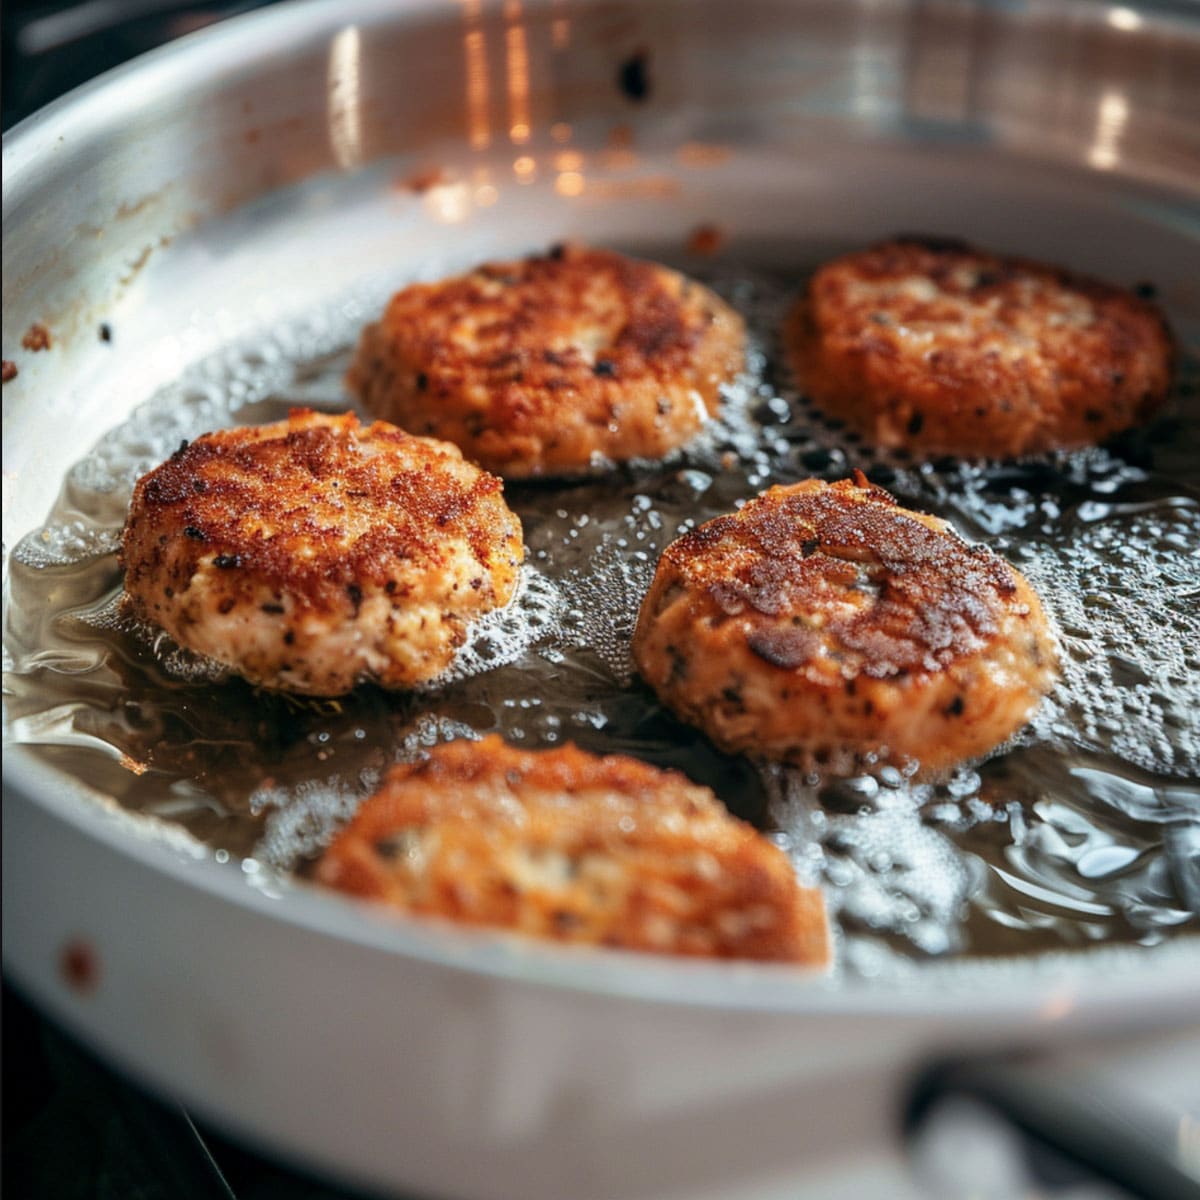 Image of uncrowded salmon croquettes frying in hot oil, on their way to a crispy, golden finish.